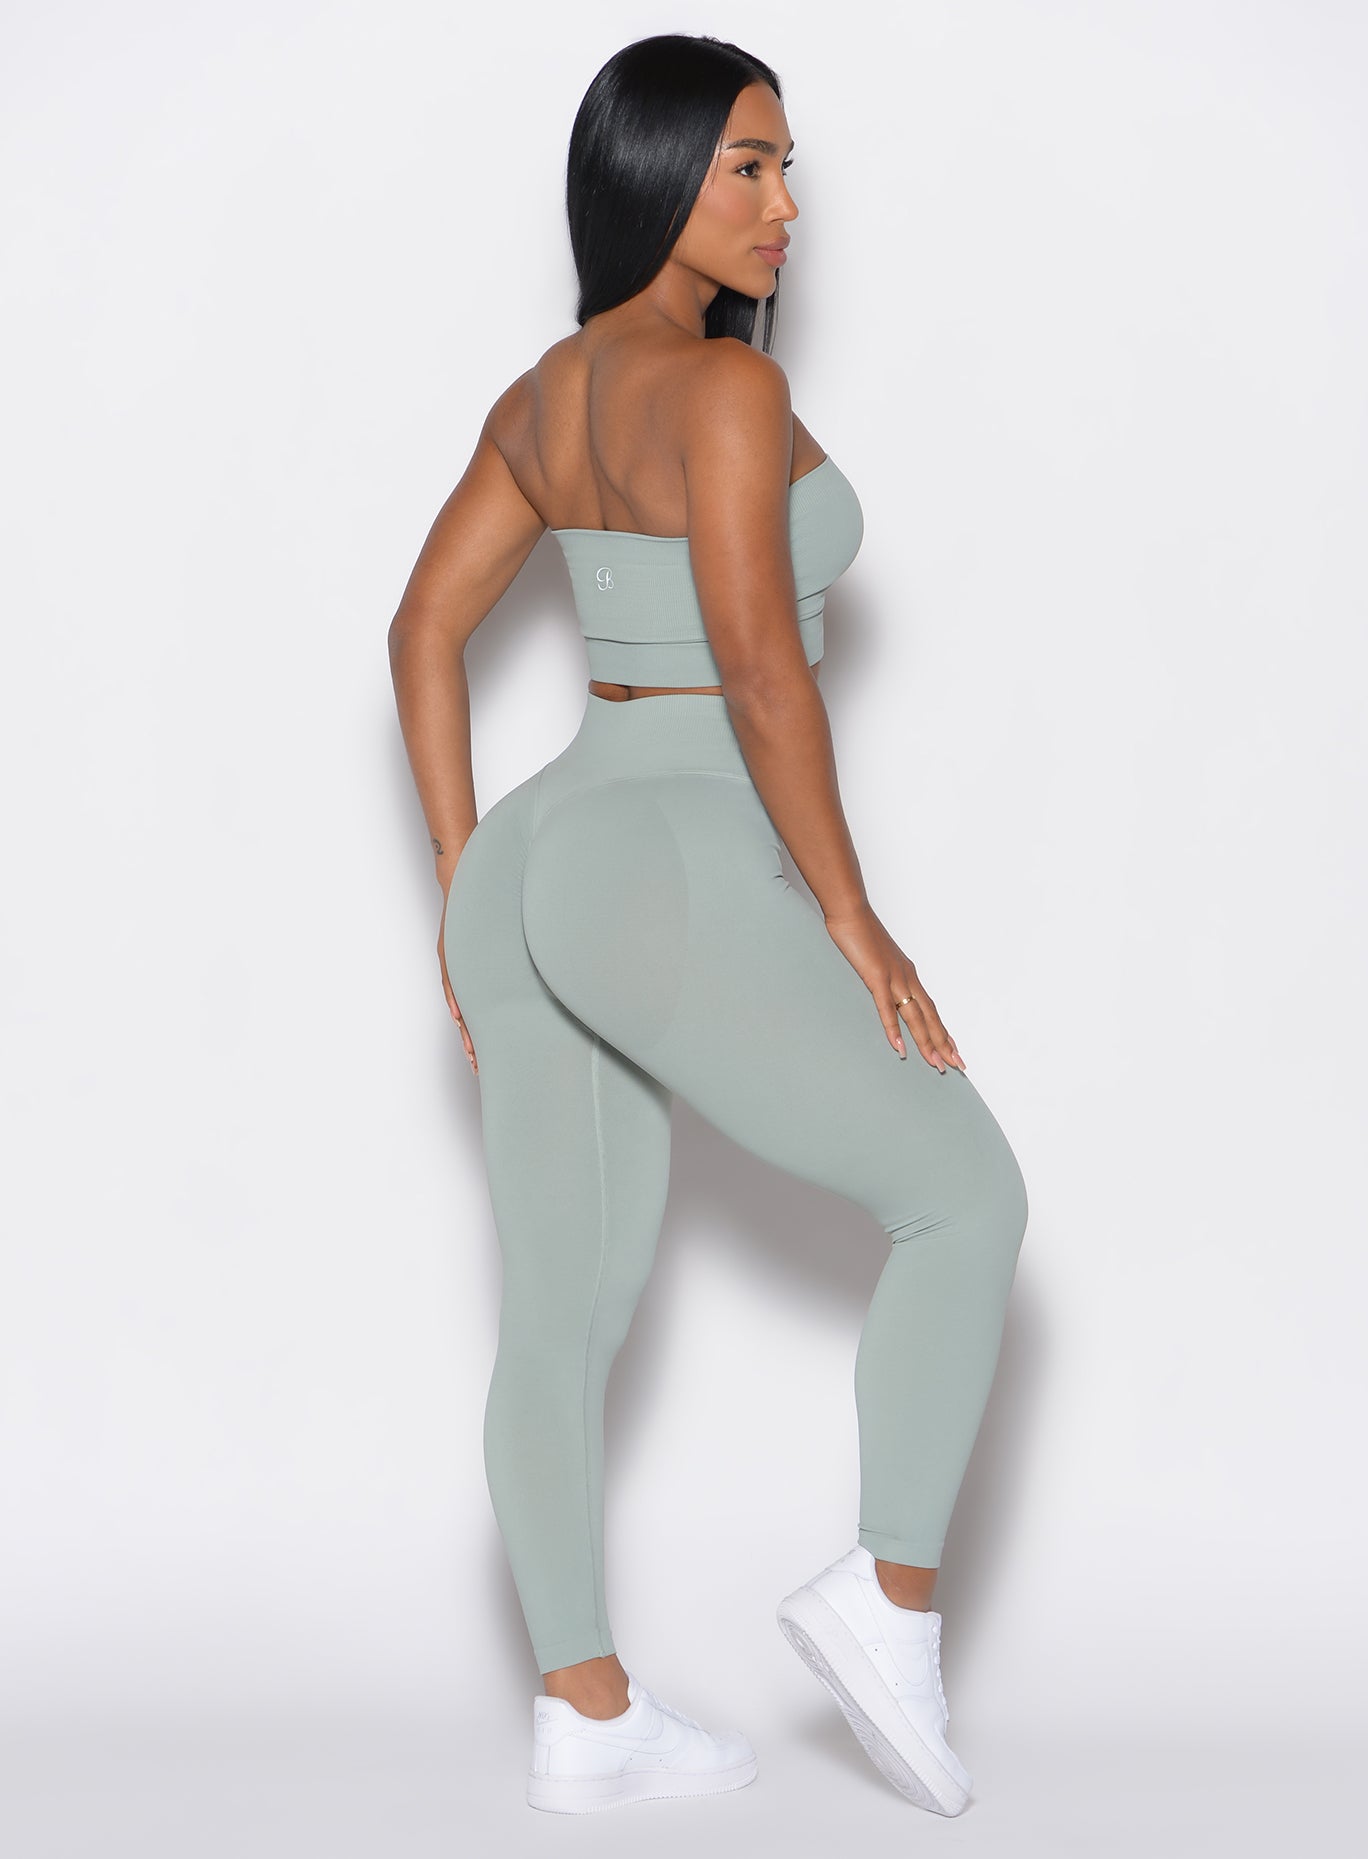 right side profile view of a model facing forward wearing our cheeky seamless leggings in light jade color along with the matching top